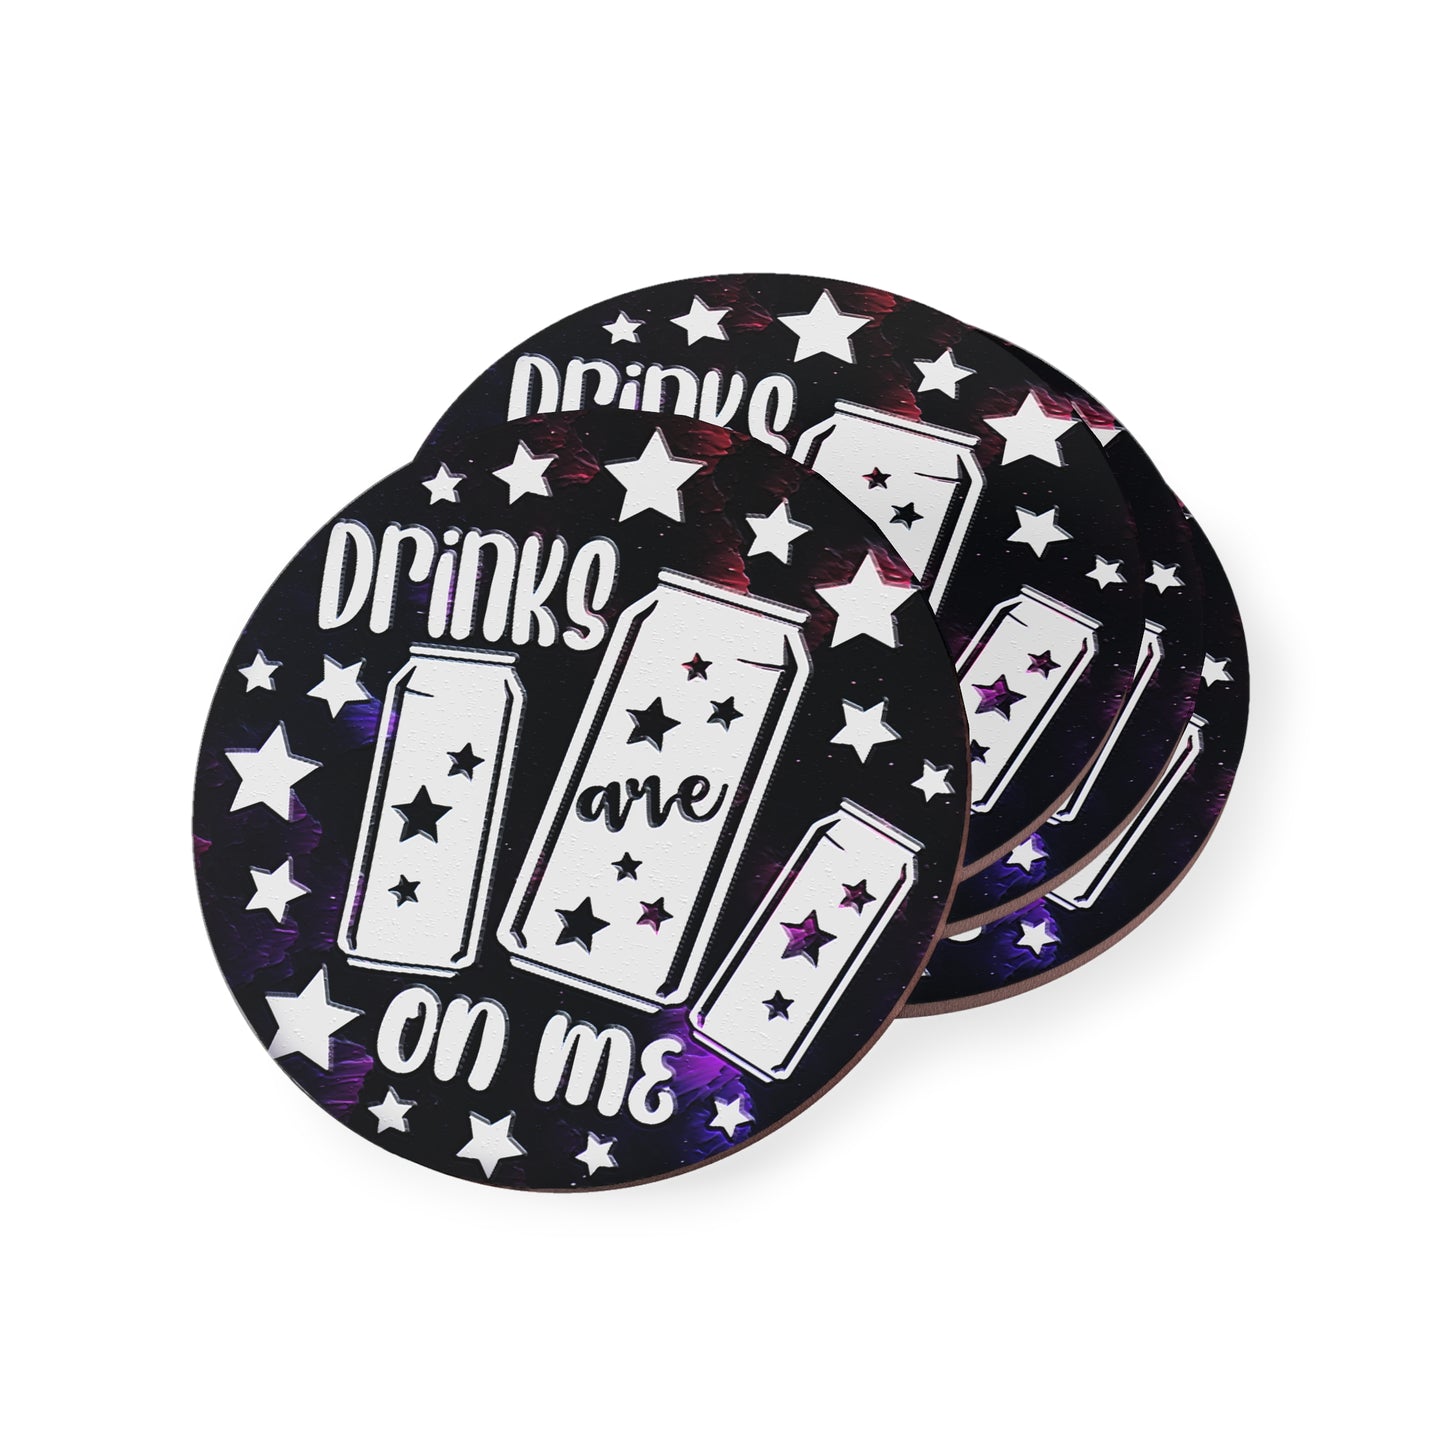 " Drinks Are On Me " Round Coasters